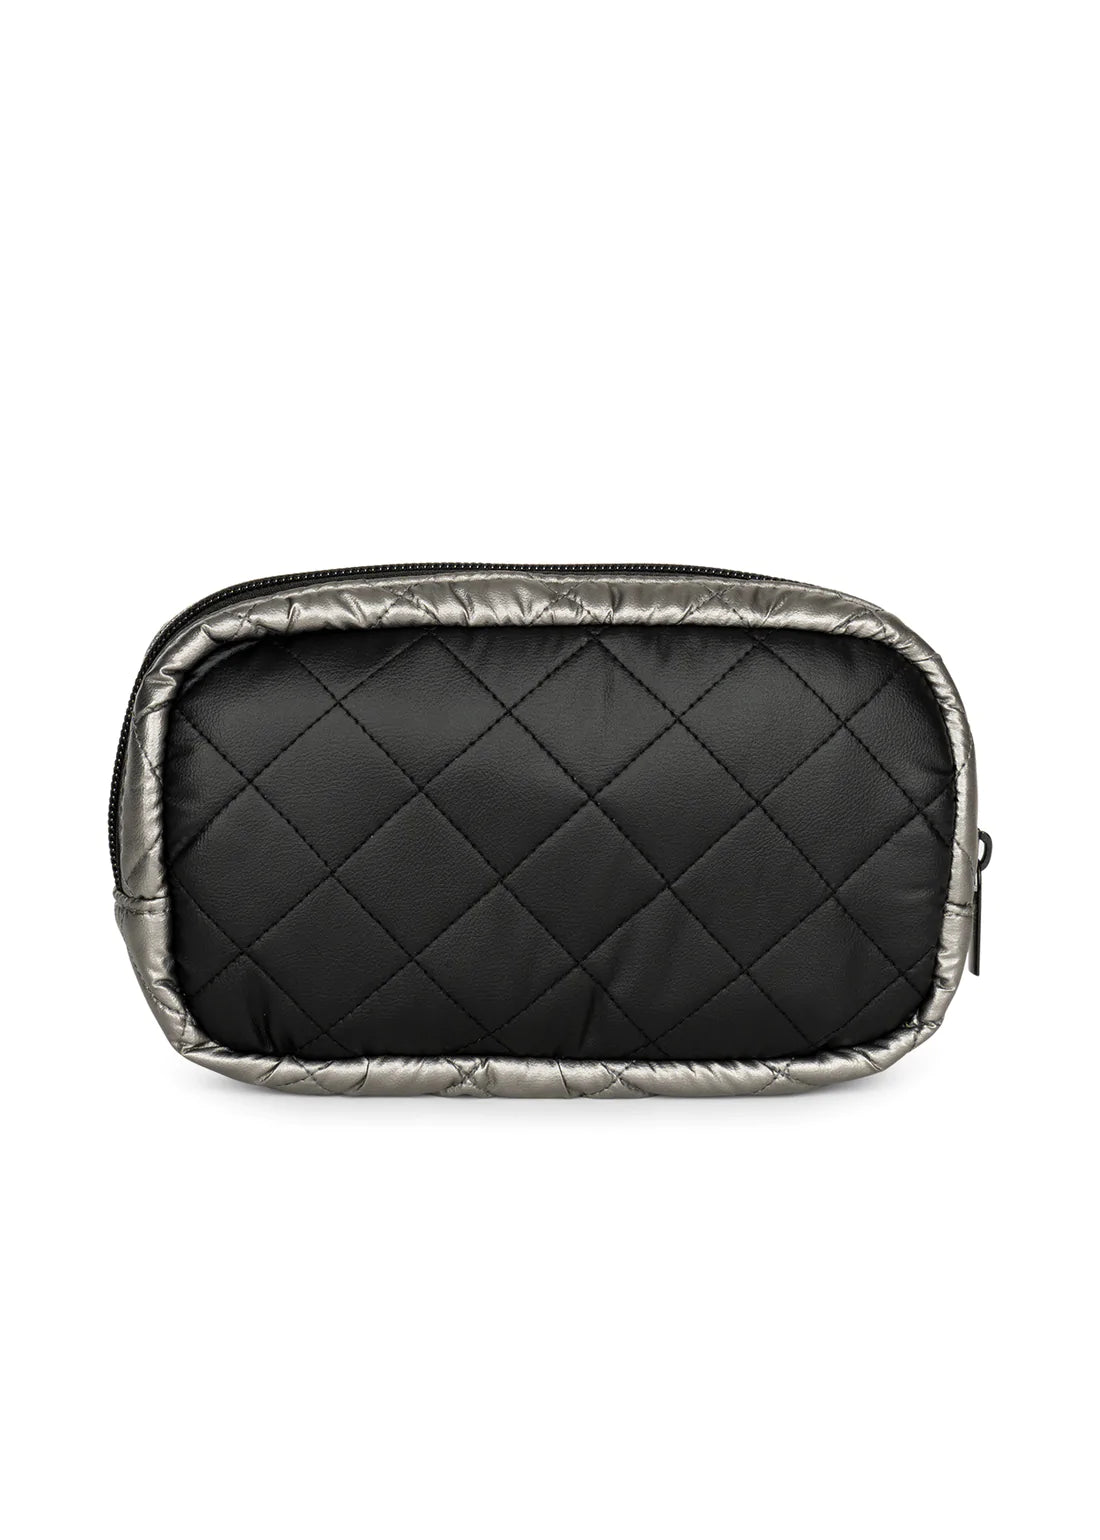 Charli cosmetic case - carbon